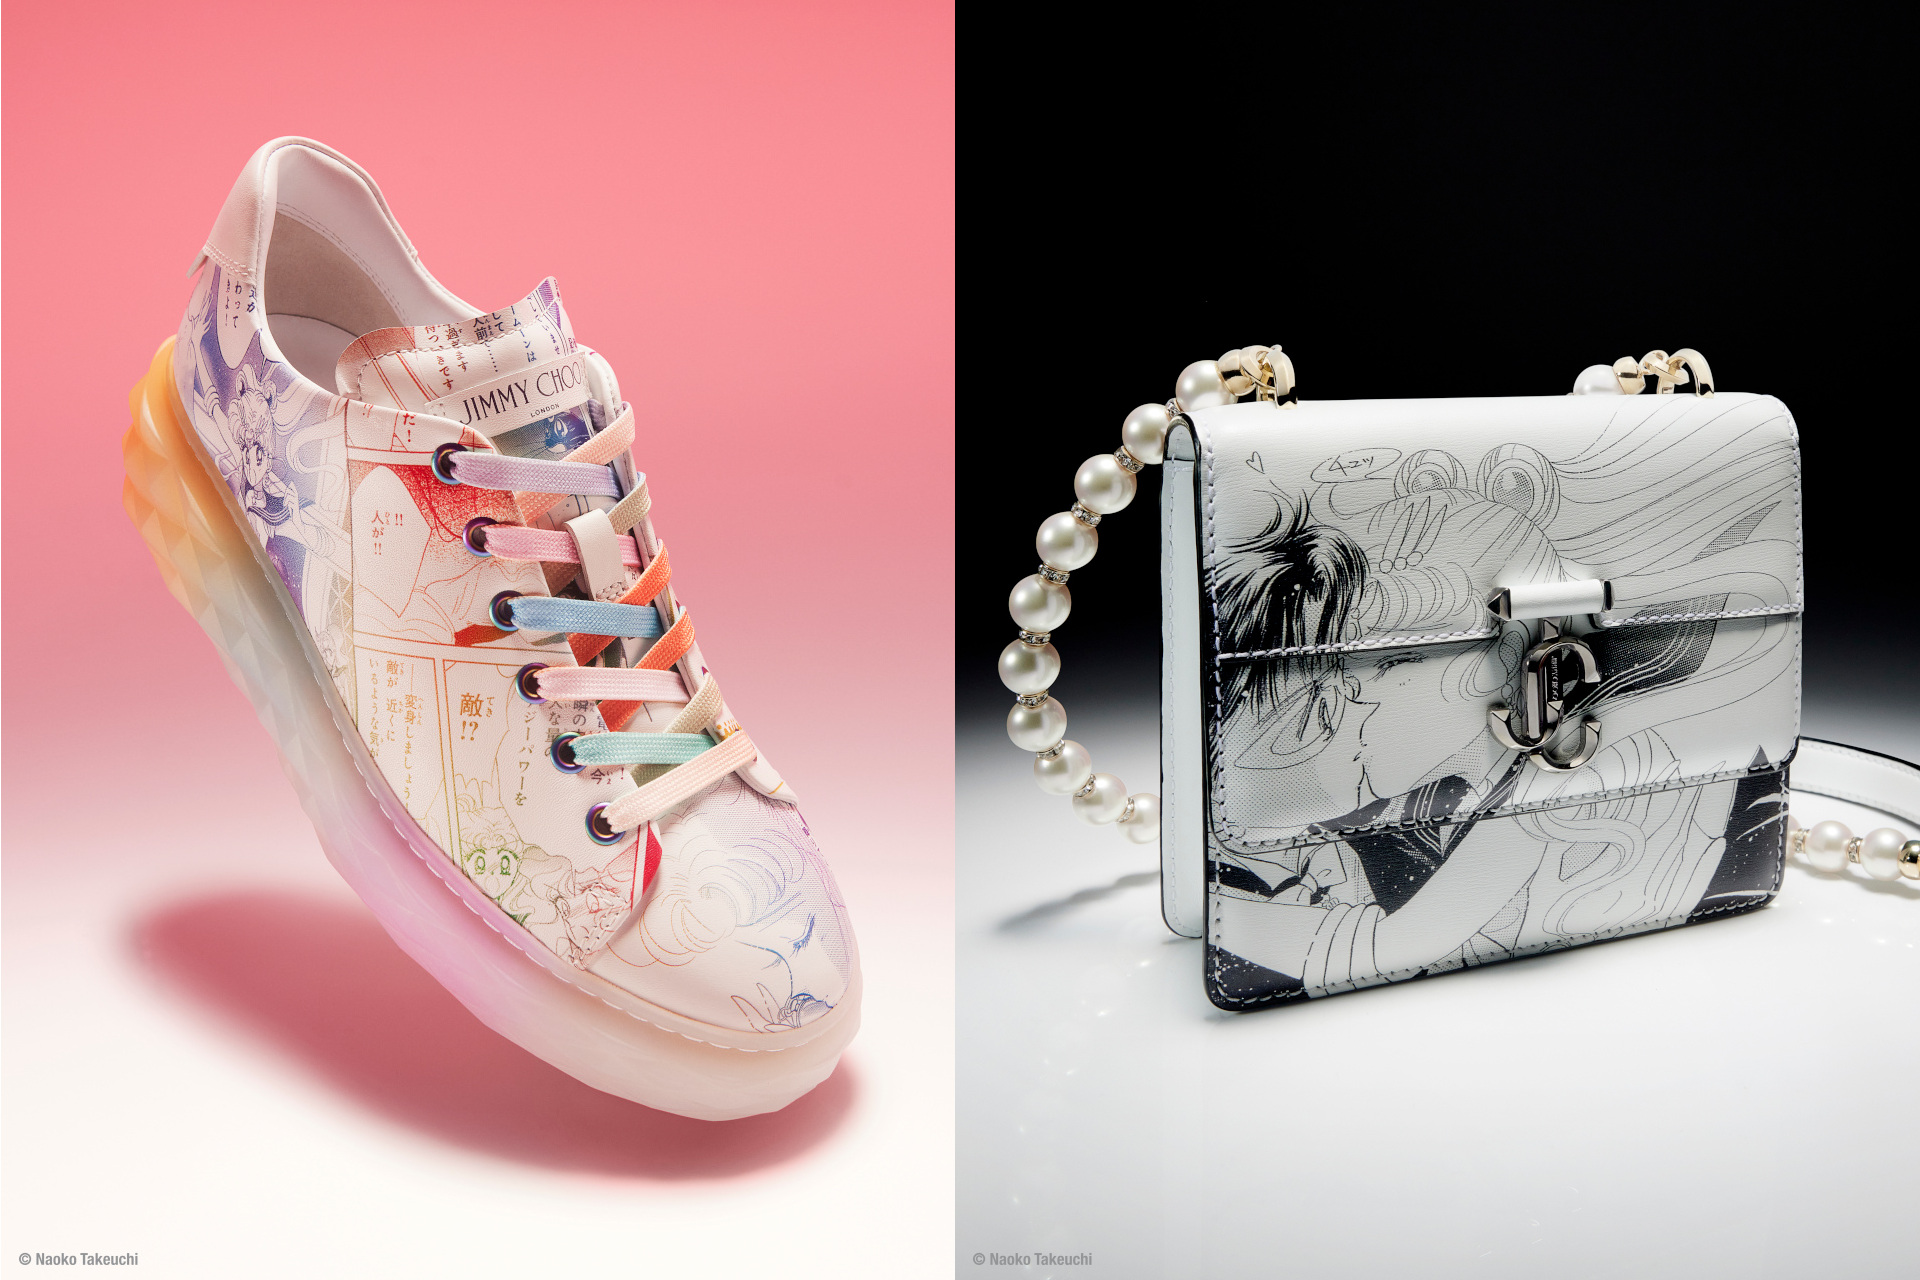 Sailor Moon x Jimmy Choo collection - another gimmick?? 